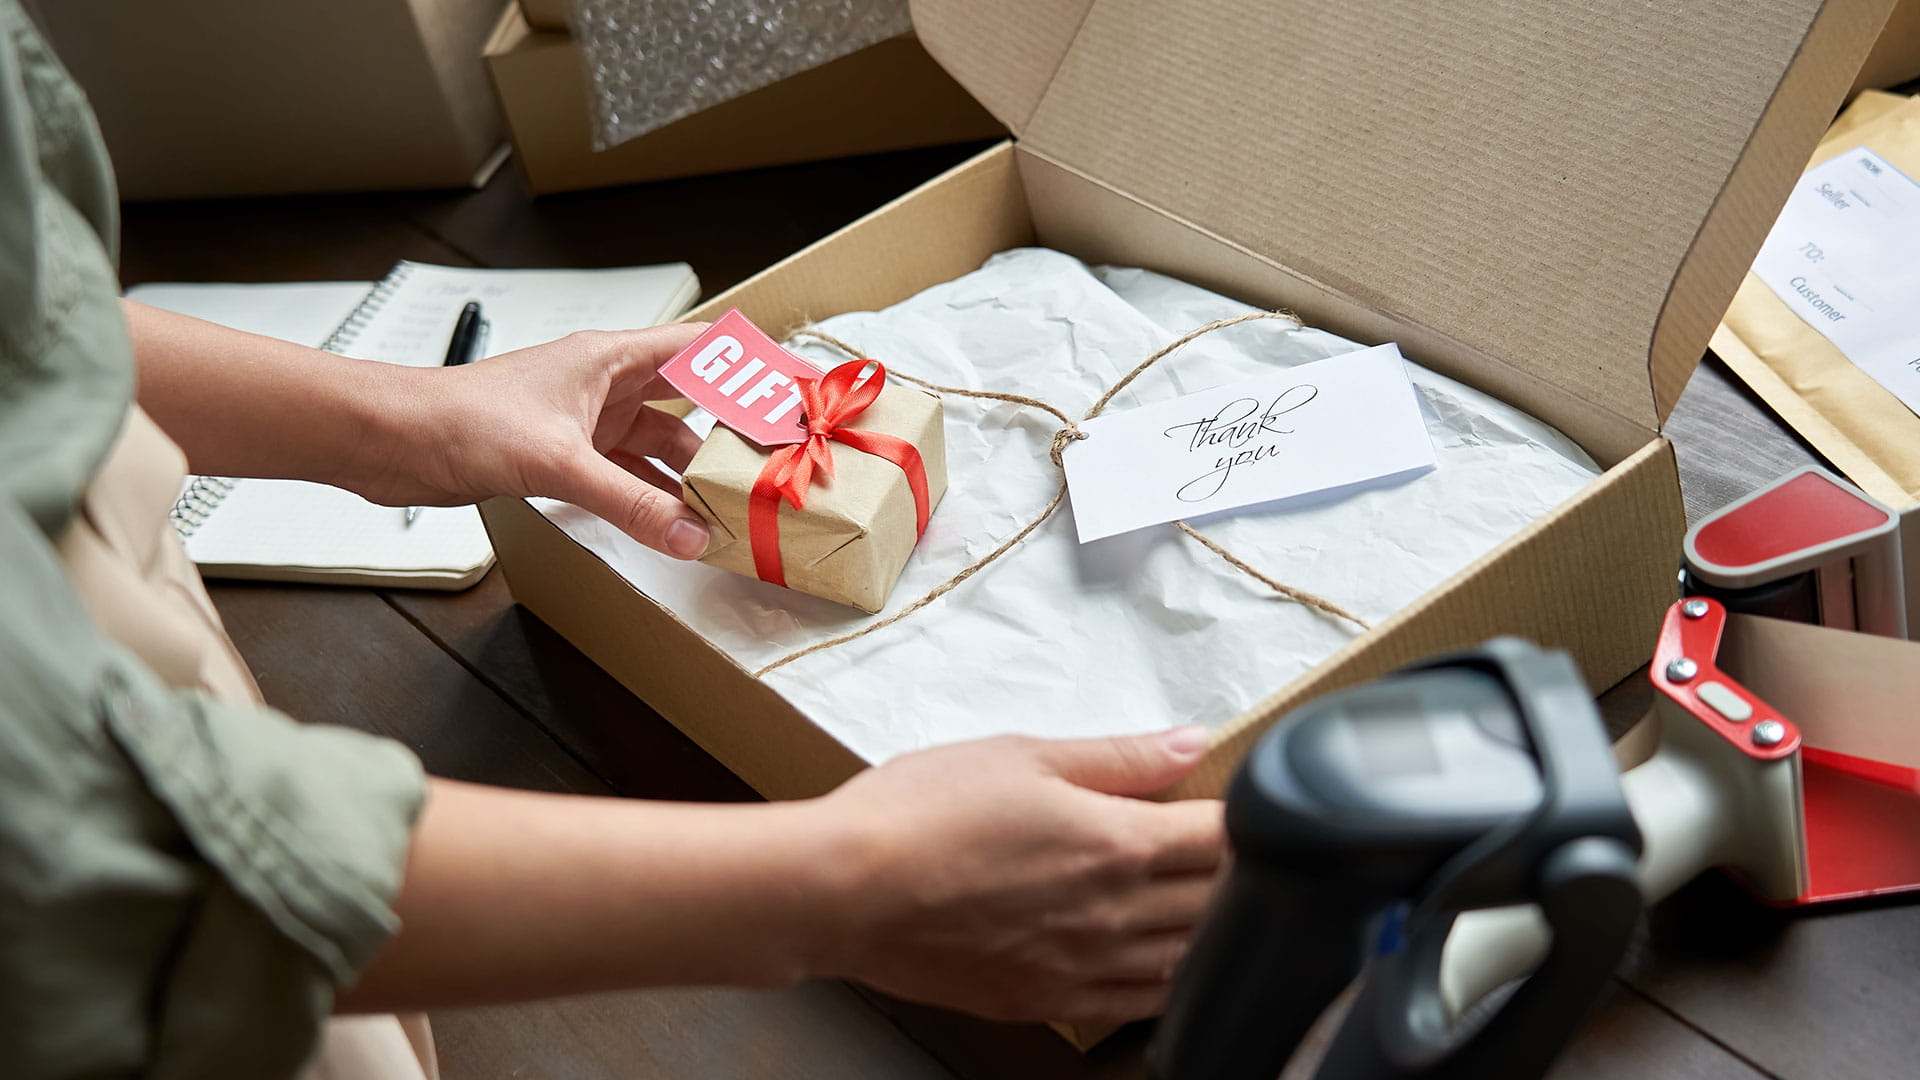 A product fulfillment with a gift added by someone